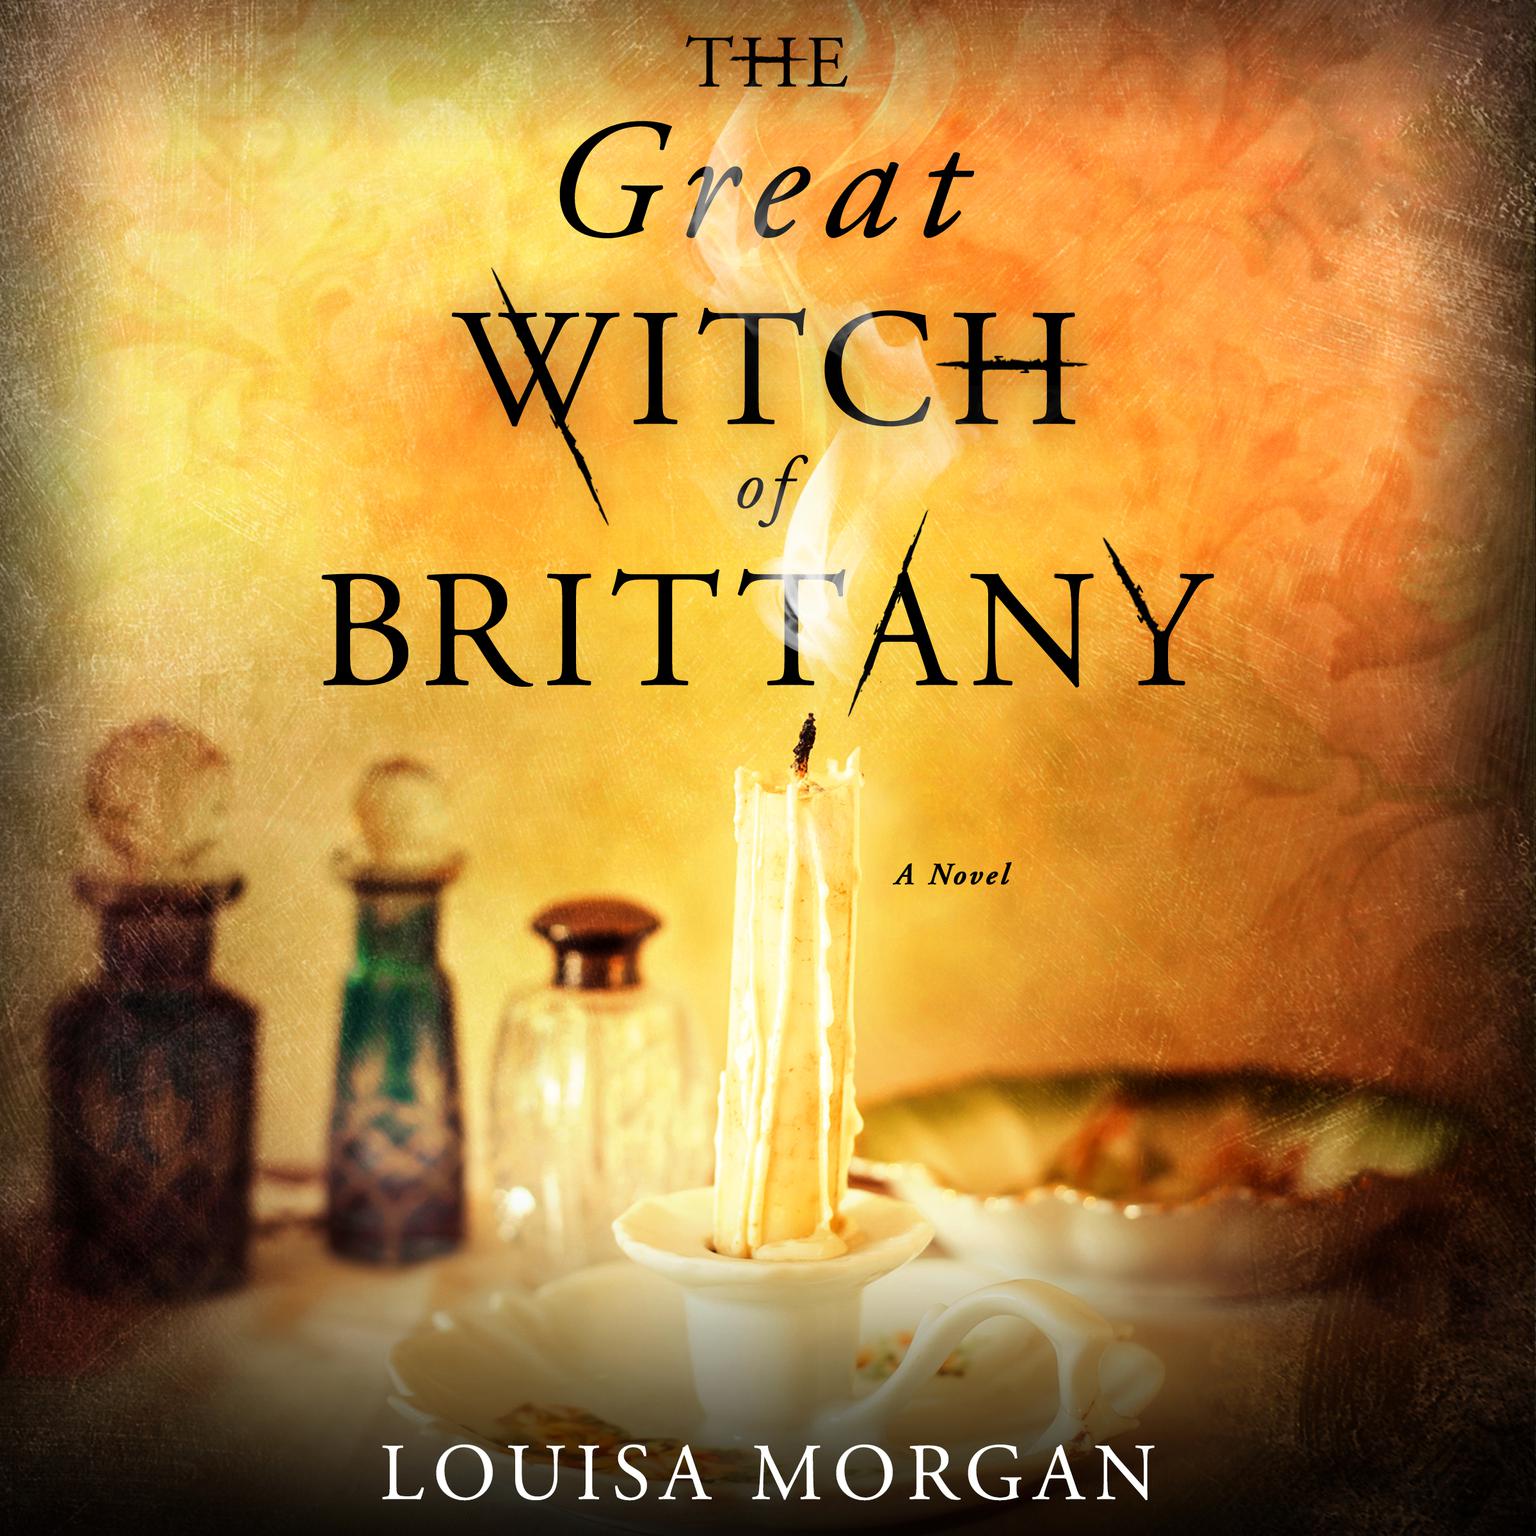 The Great Witch of Brittany: A Novel Audiobook, by Louisa Morgan